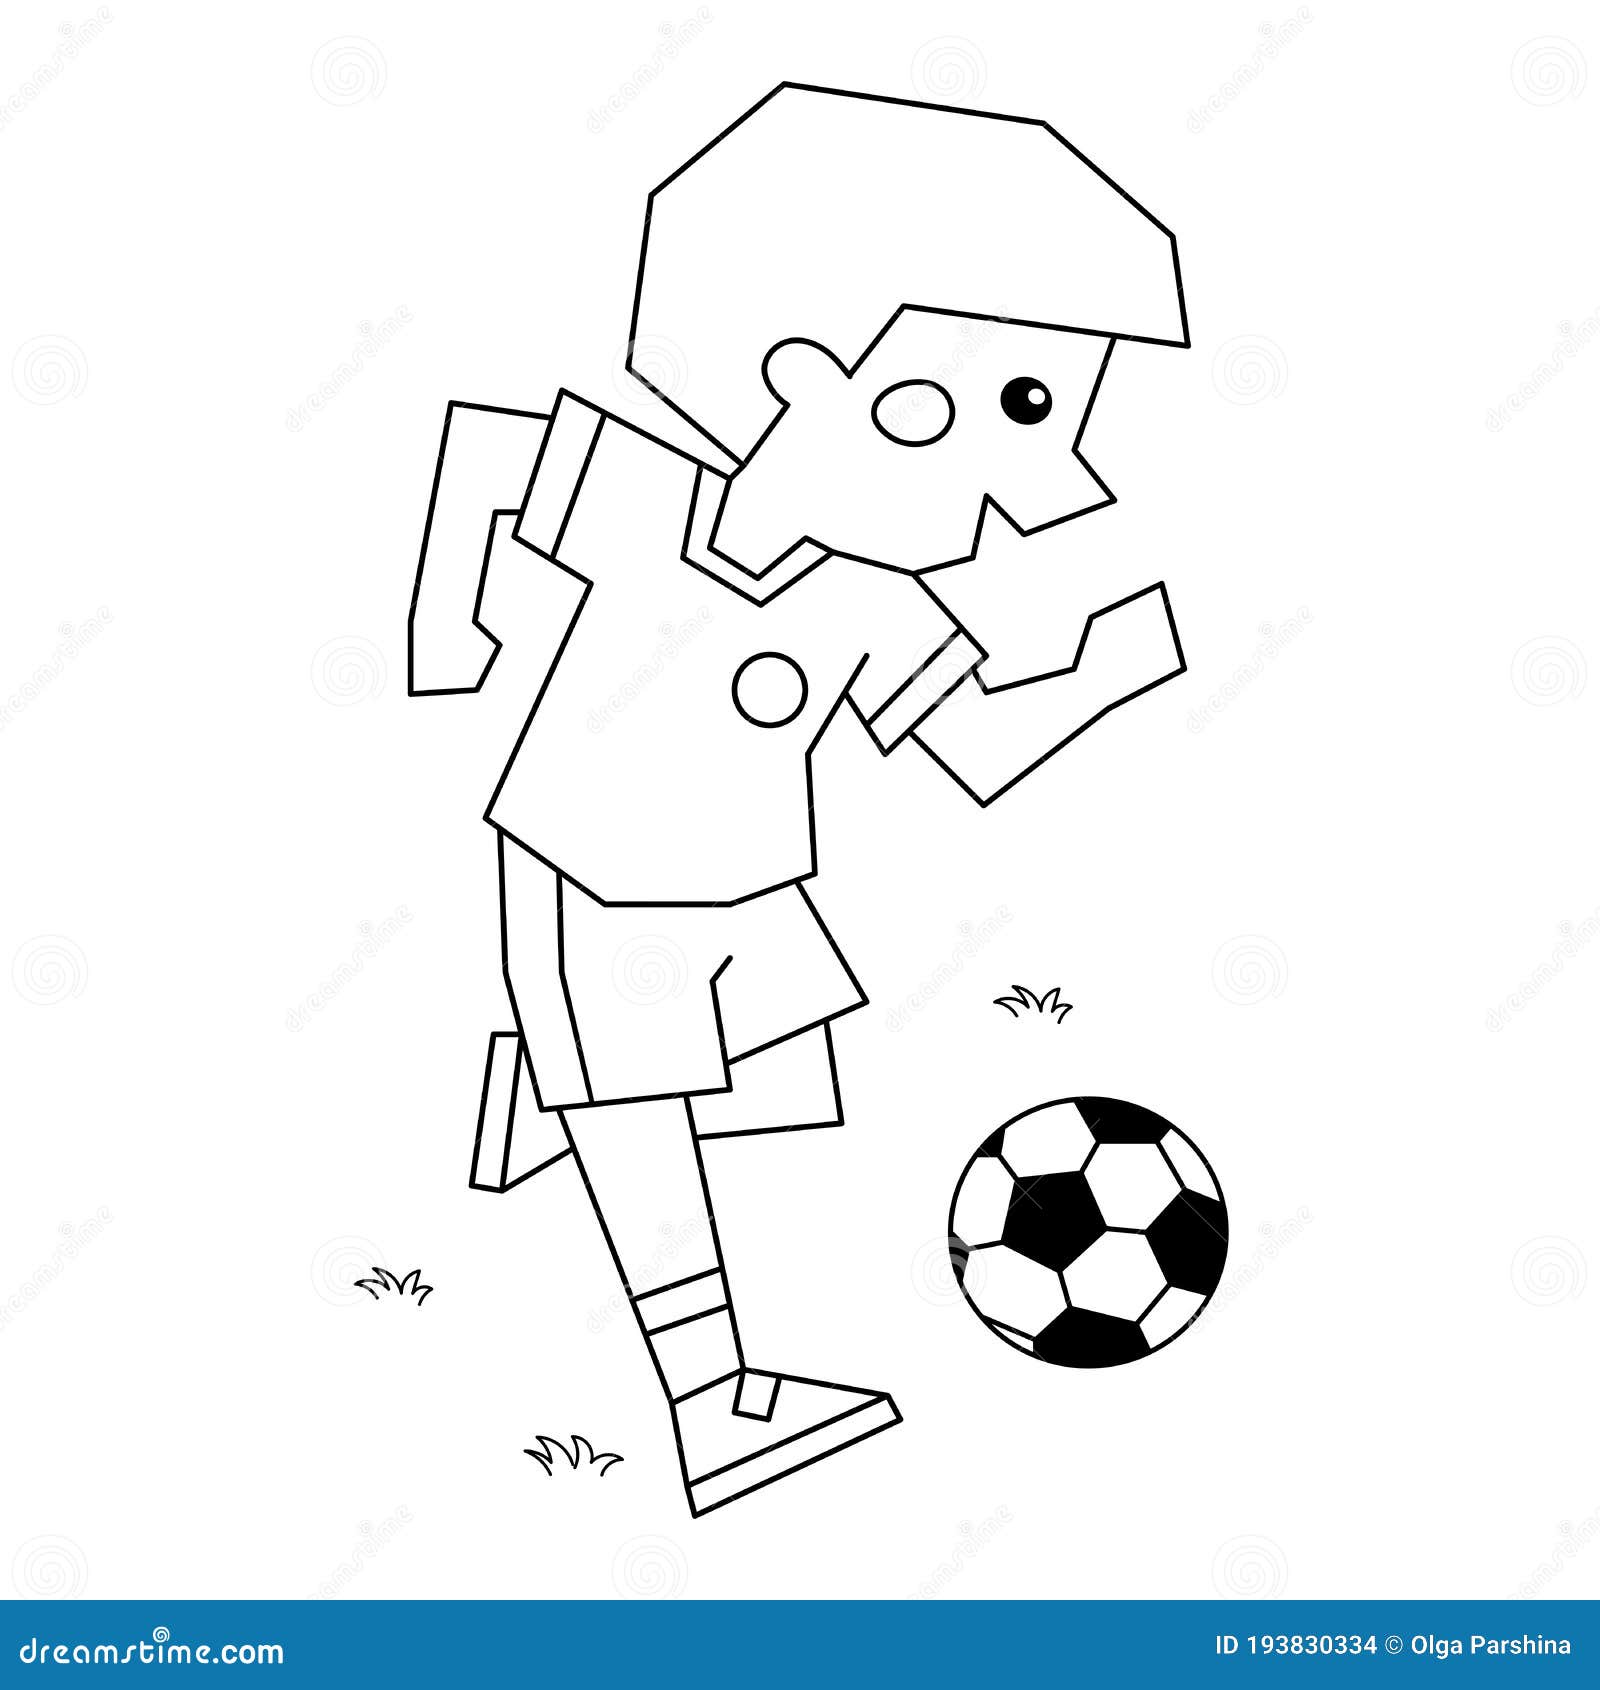 Coloring page outline of a cartoon boy with a soccer ball coloring book for kids stock vector